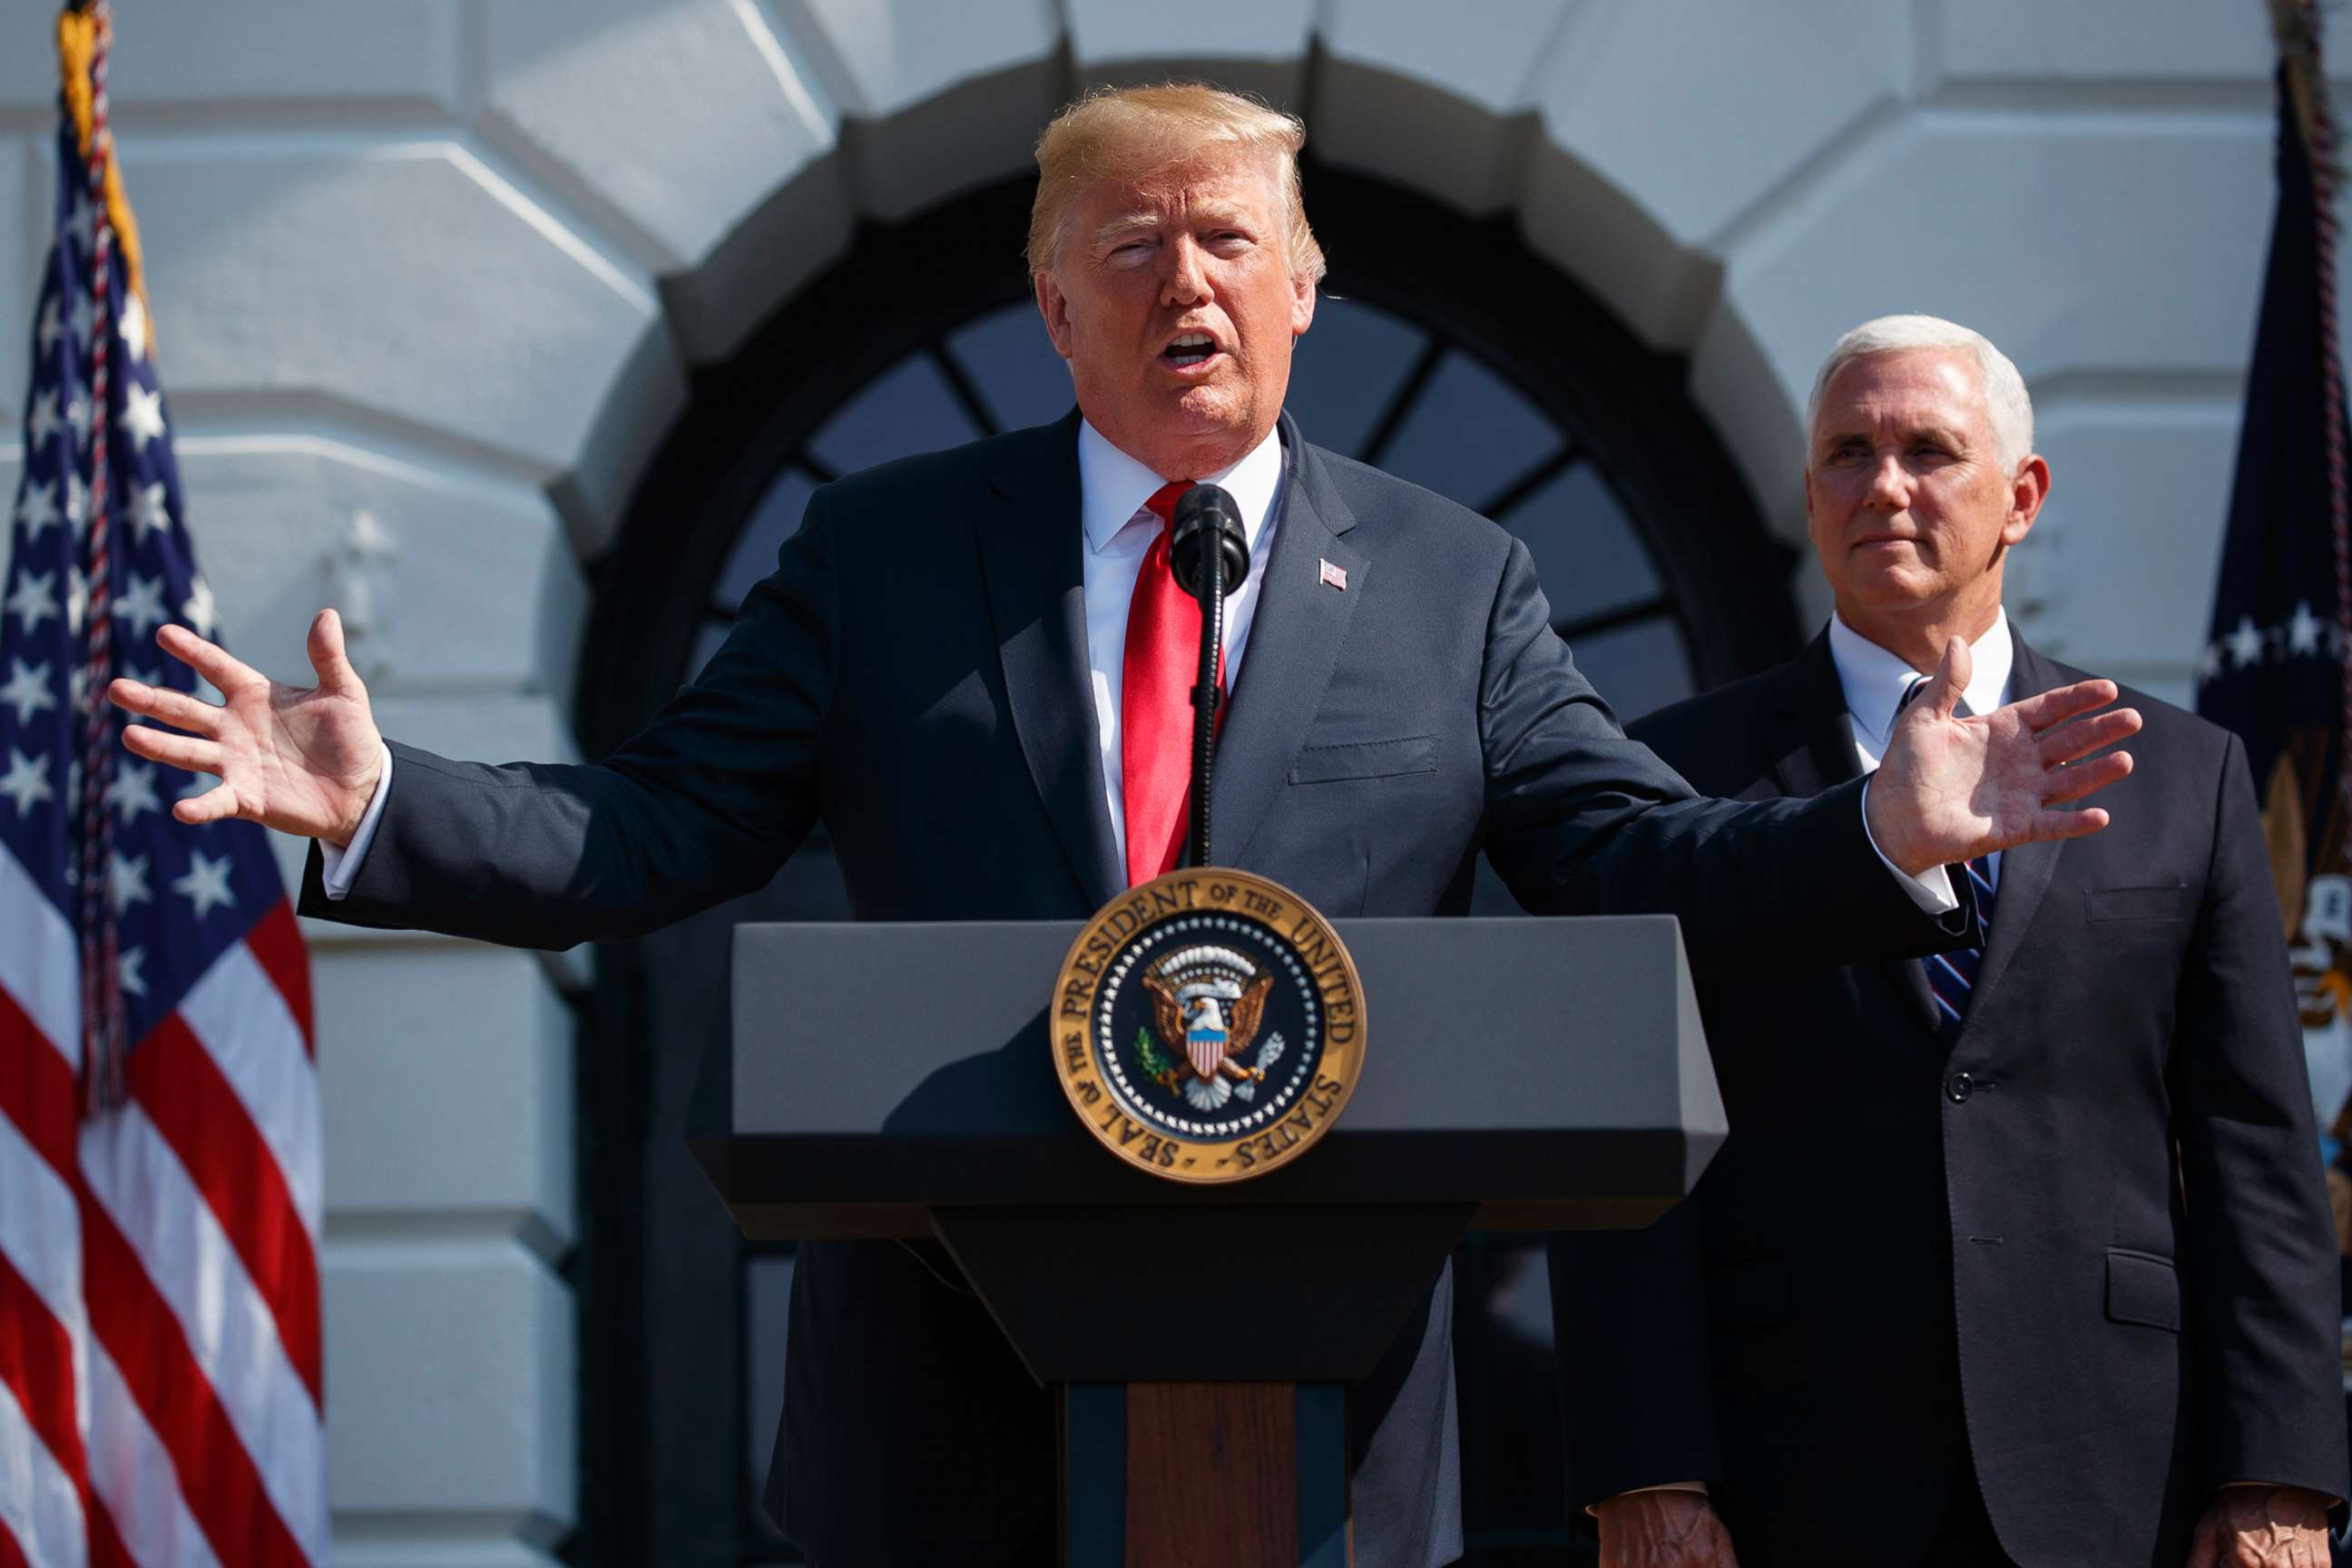 PHOTO: President Donald Trump delivers remarks about the economy on the South Lawn of the White House with Vice President Mike Pence, July 27, 2018.